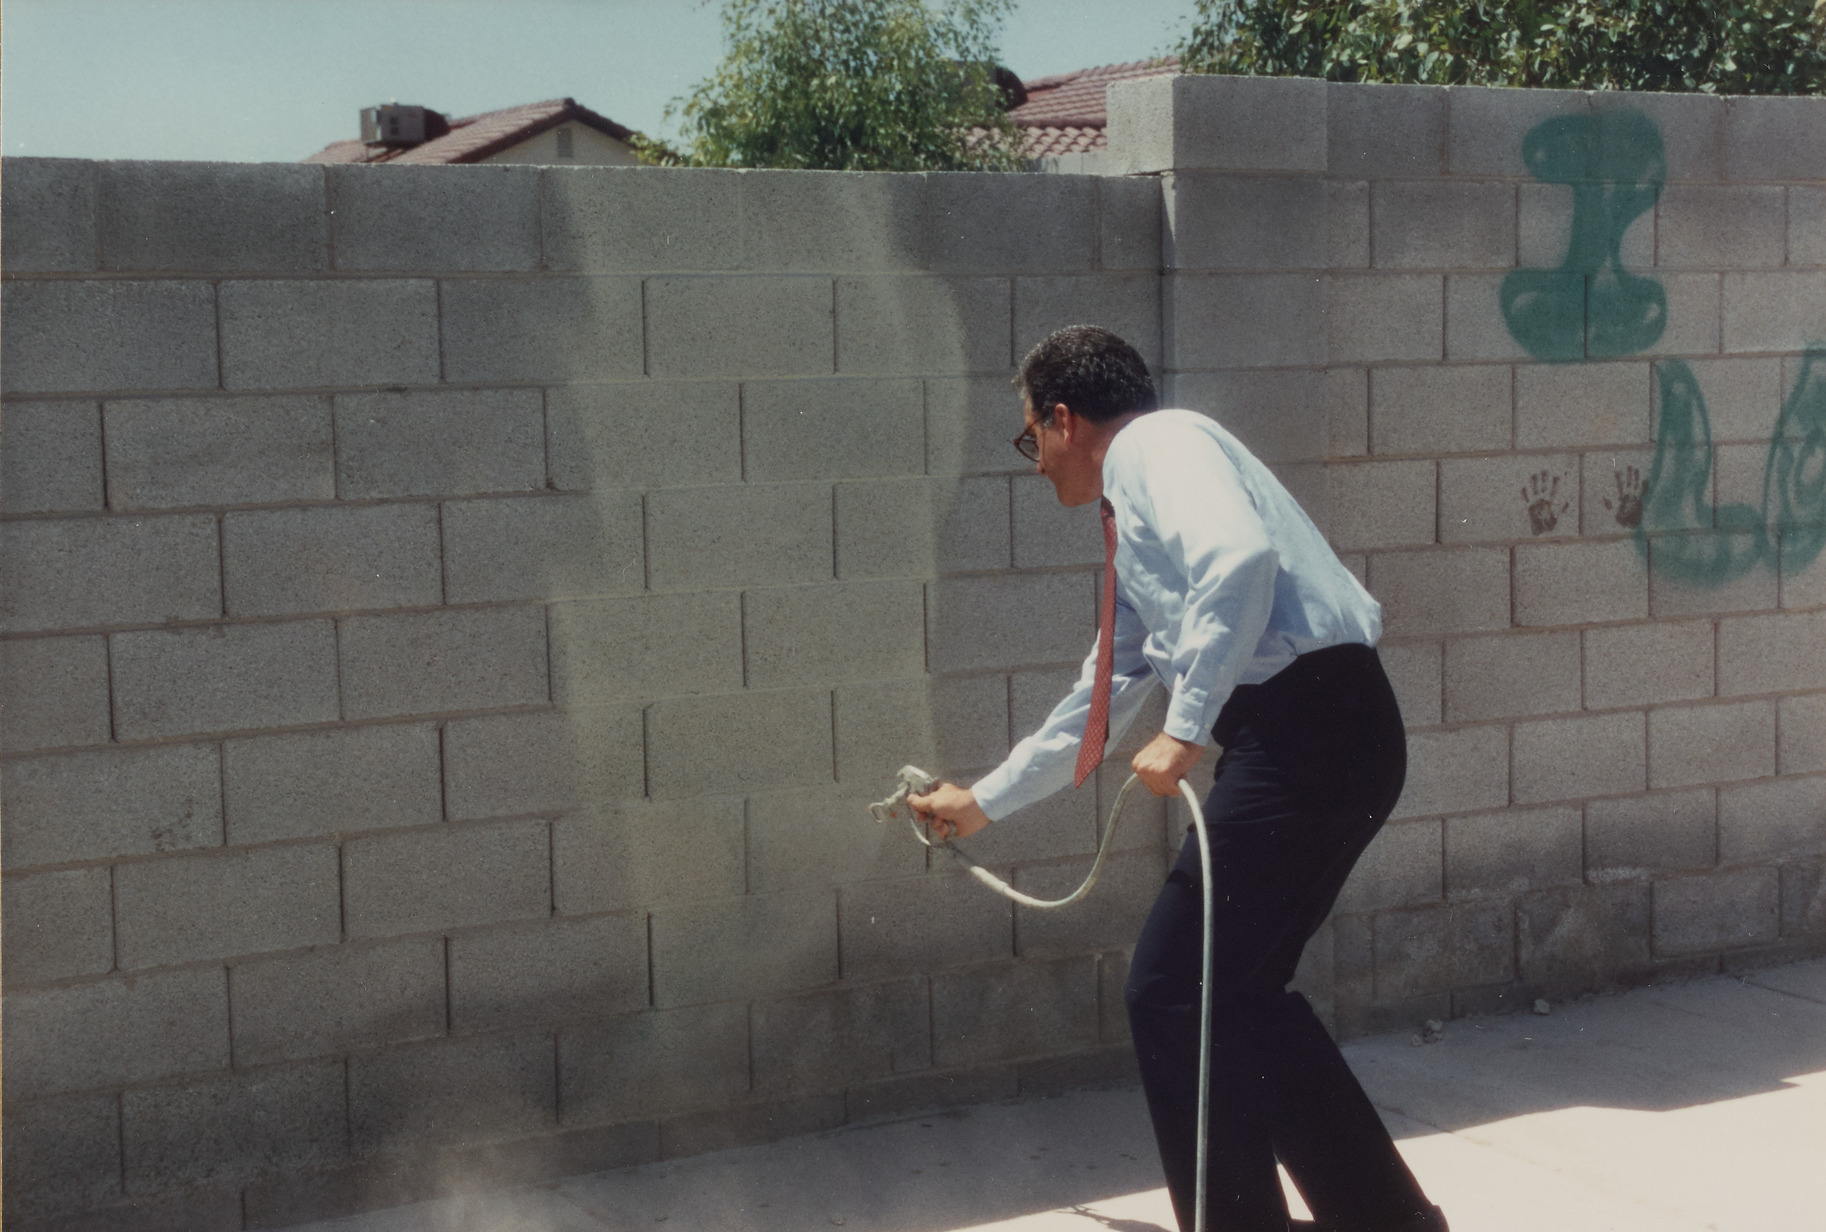 Photograph of Ron Lurie at event for graffiti removal